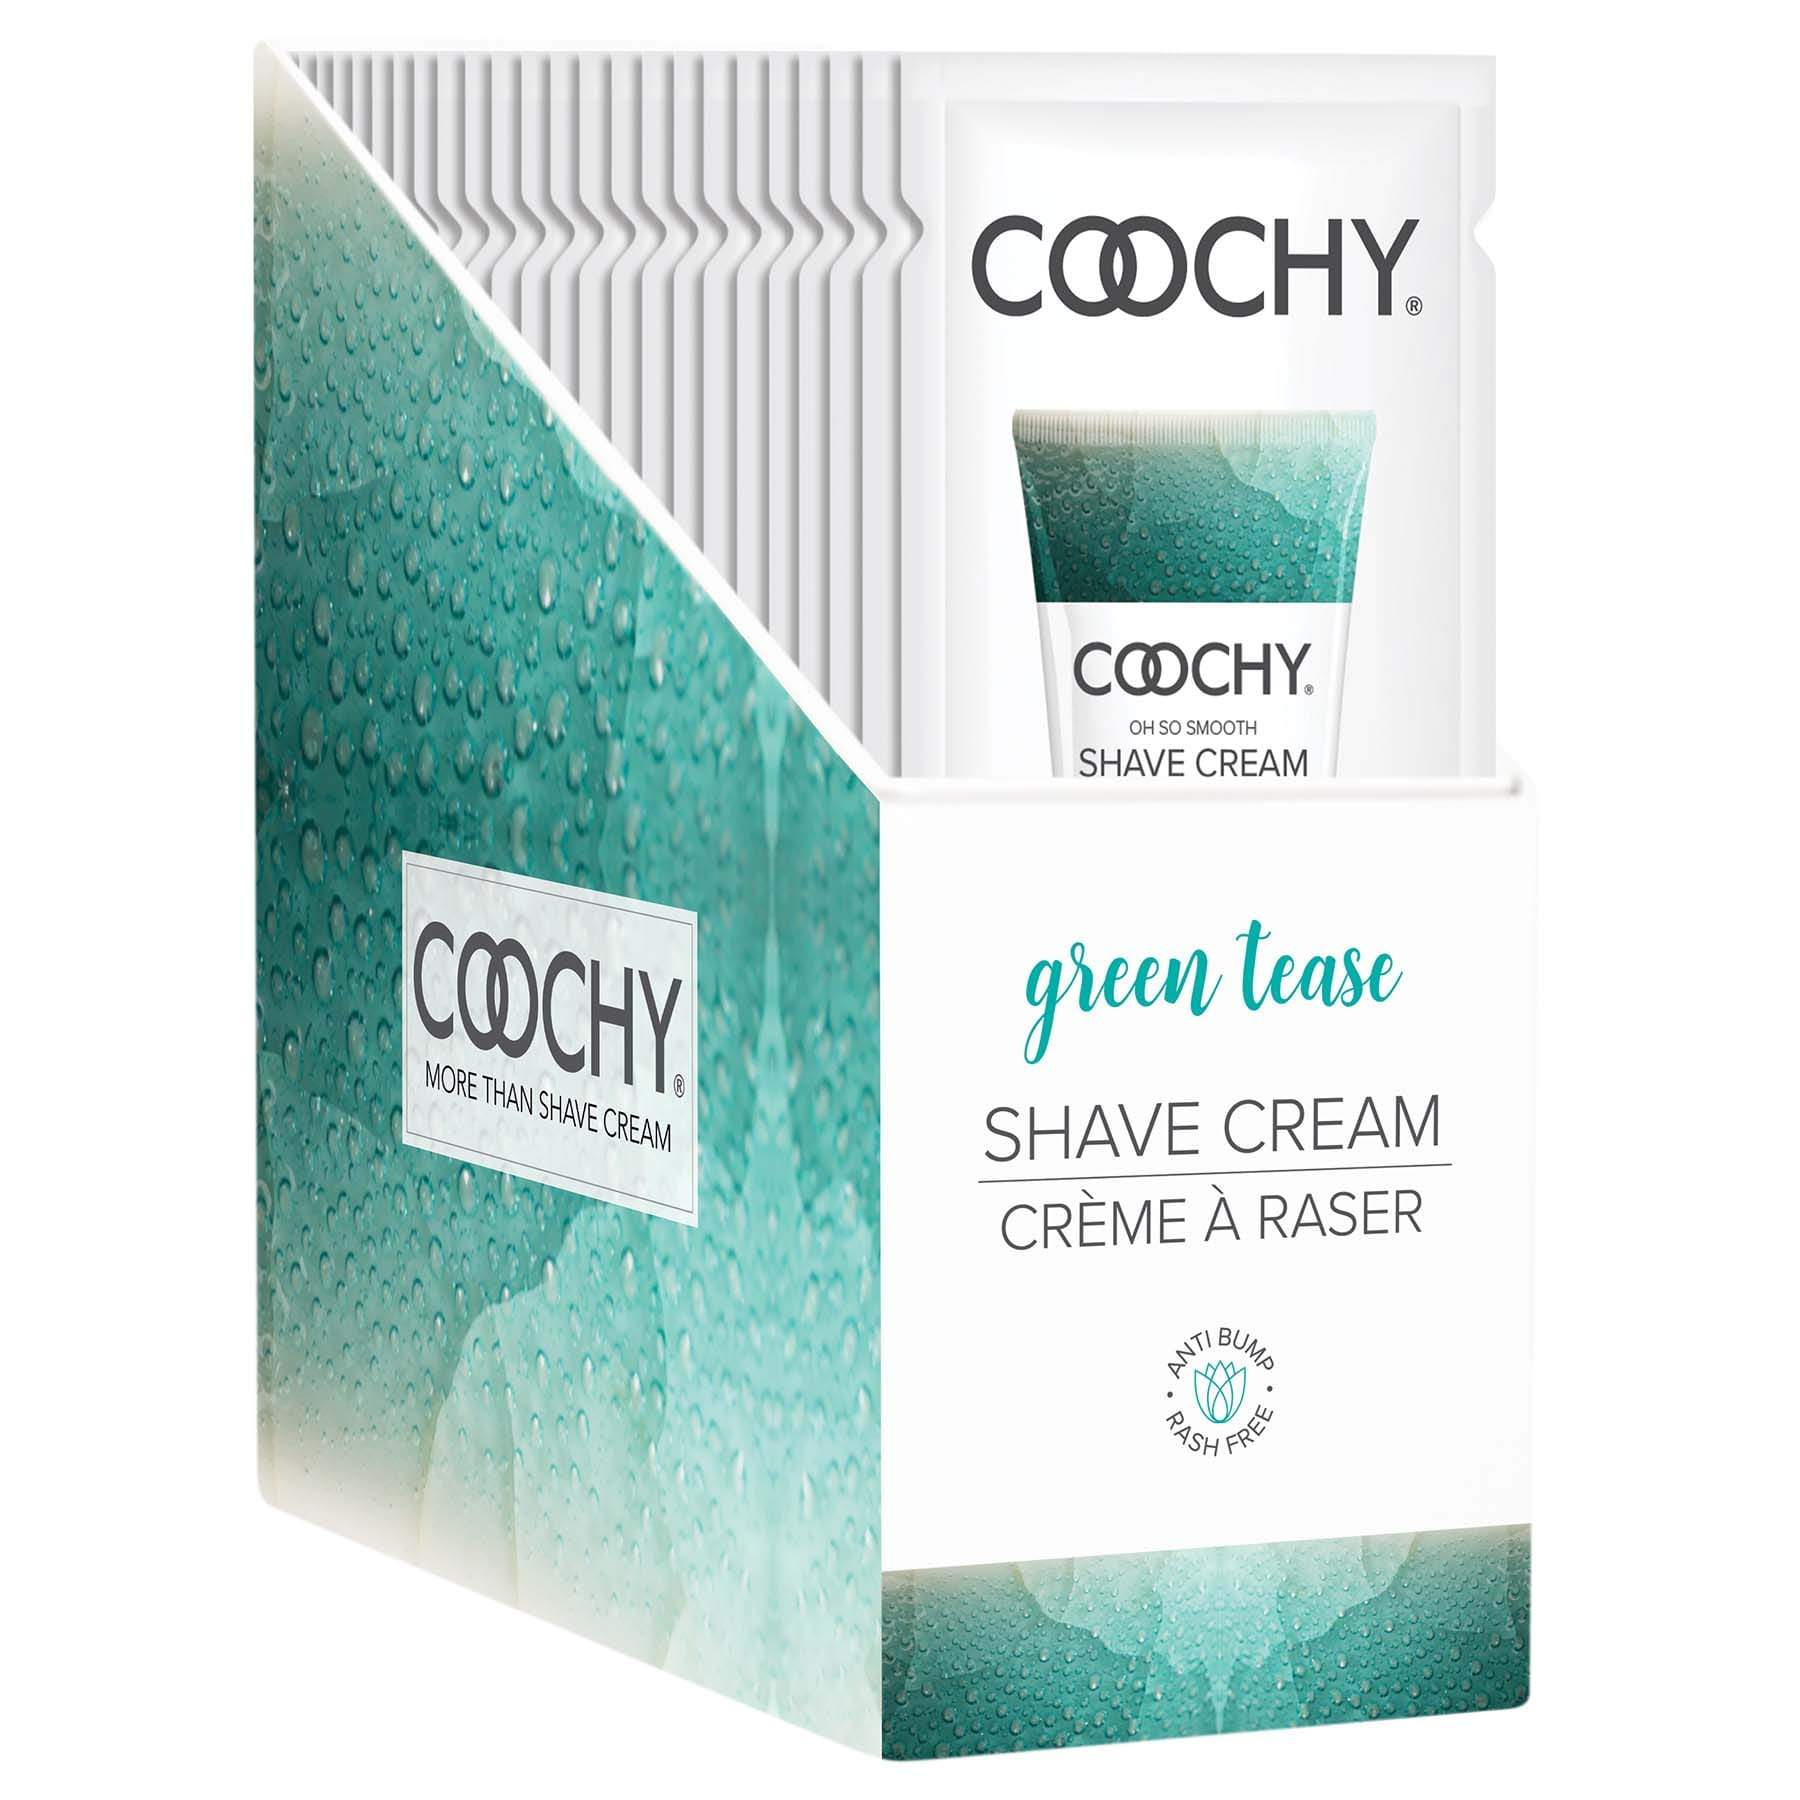 coochy shave cream green tease 15 ml foils 24 count display